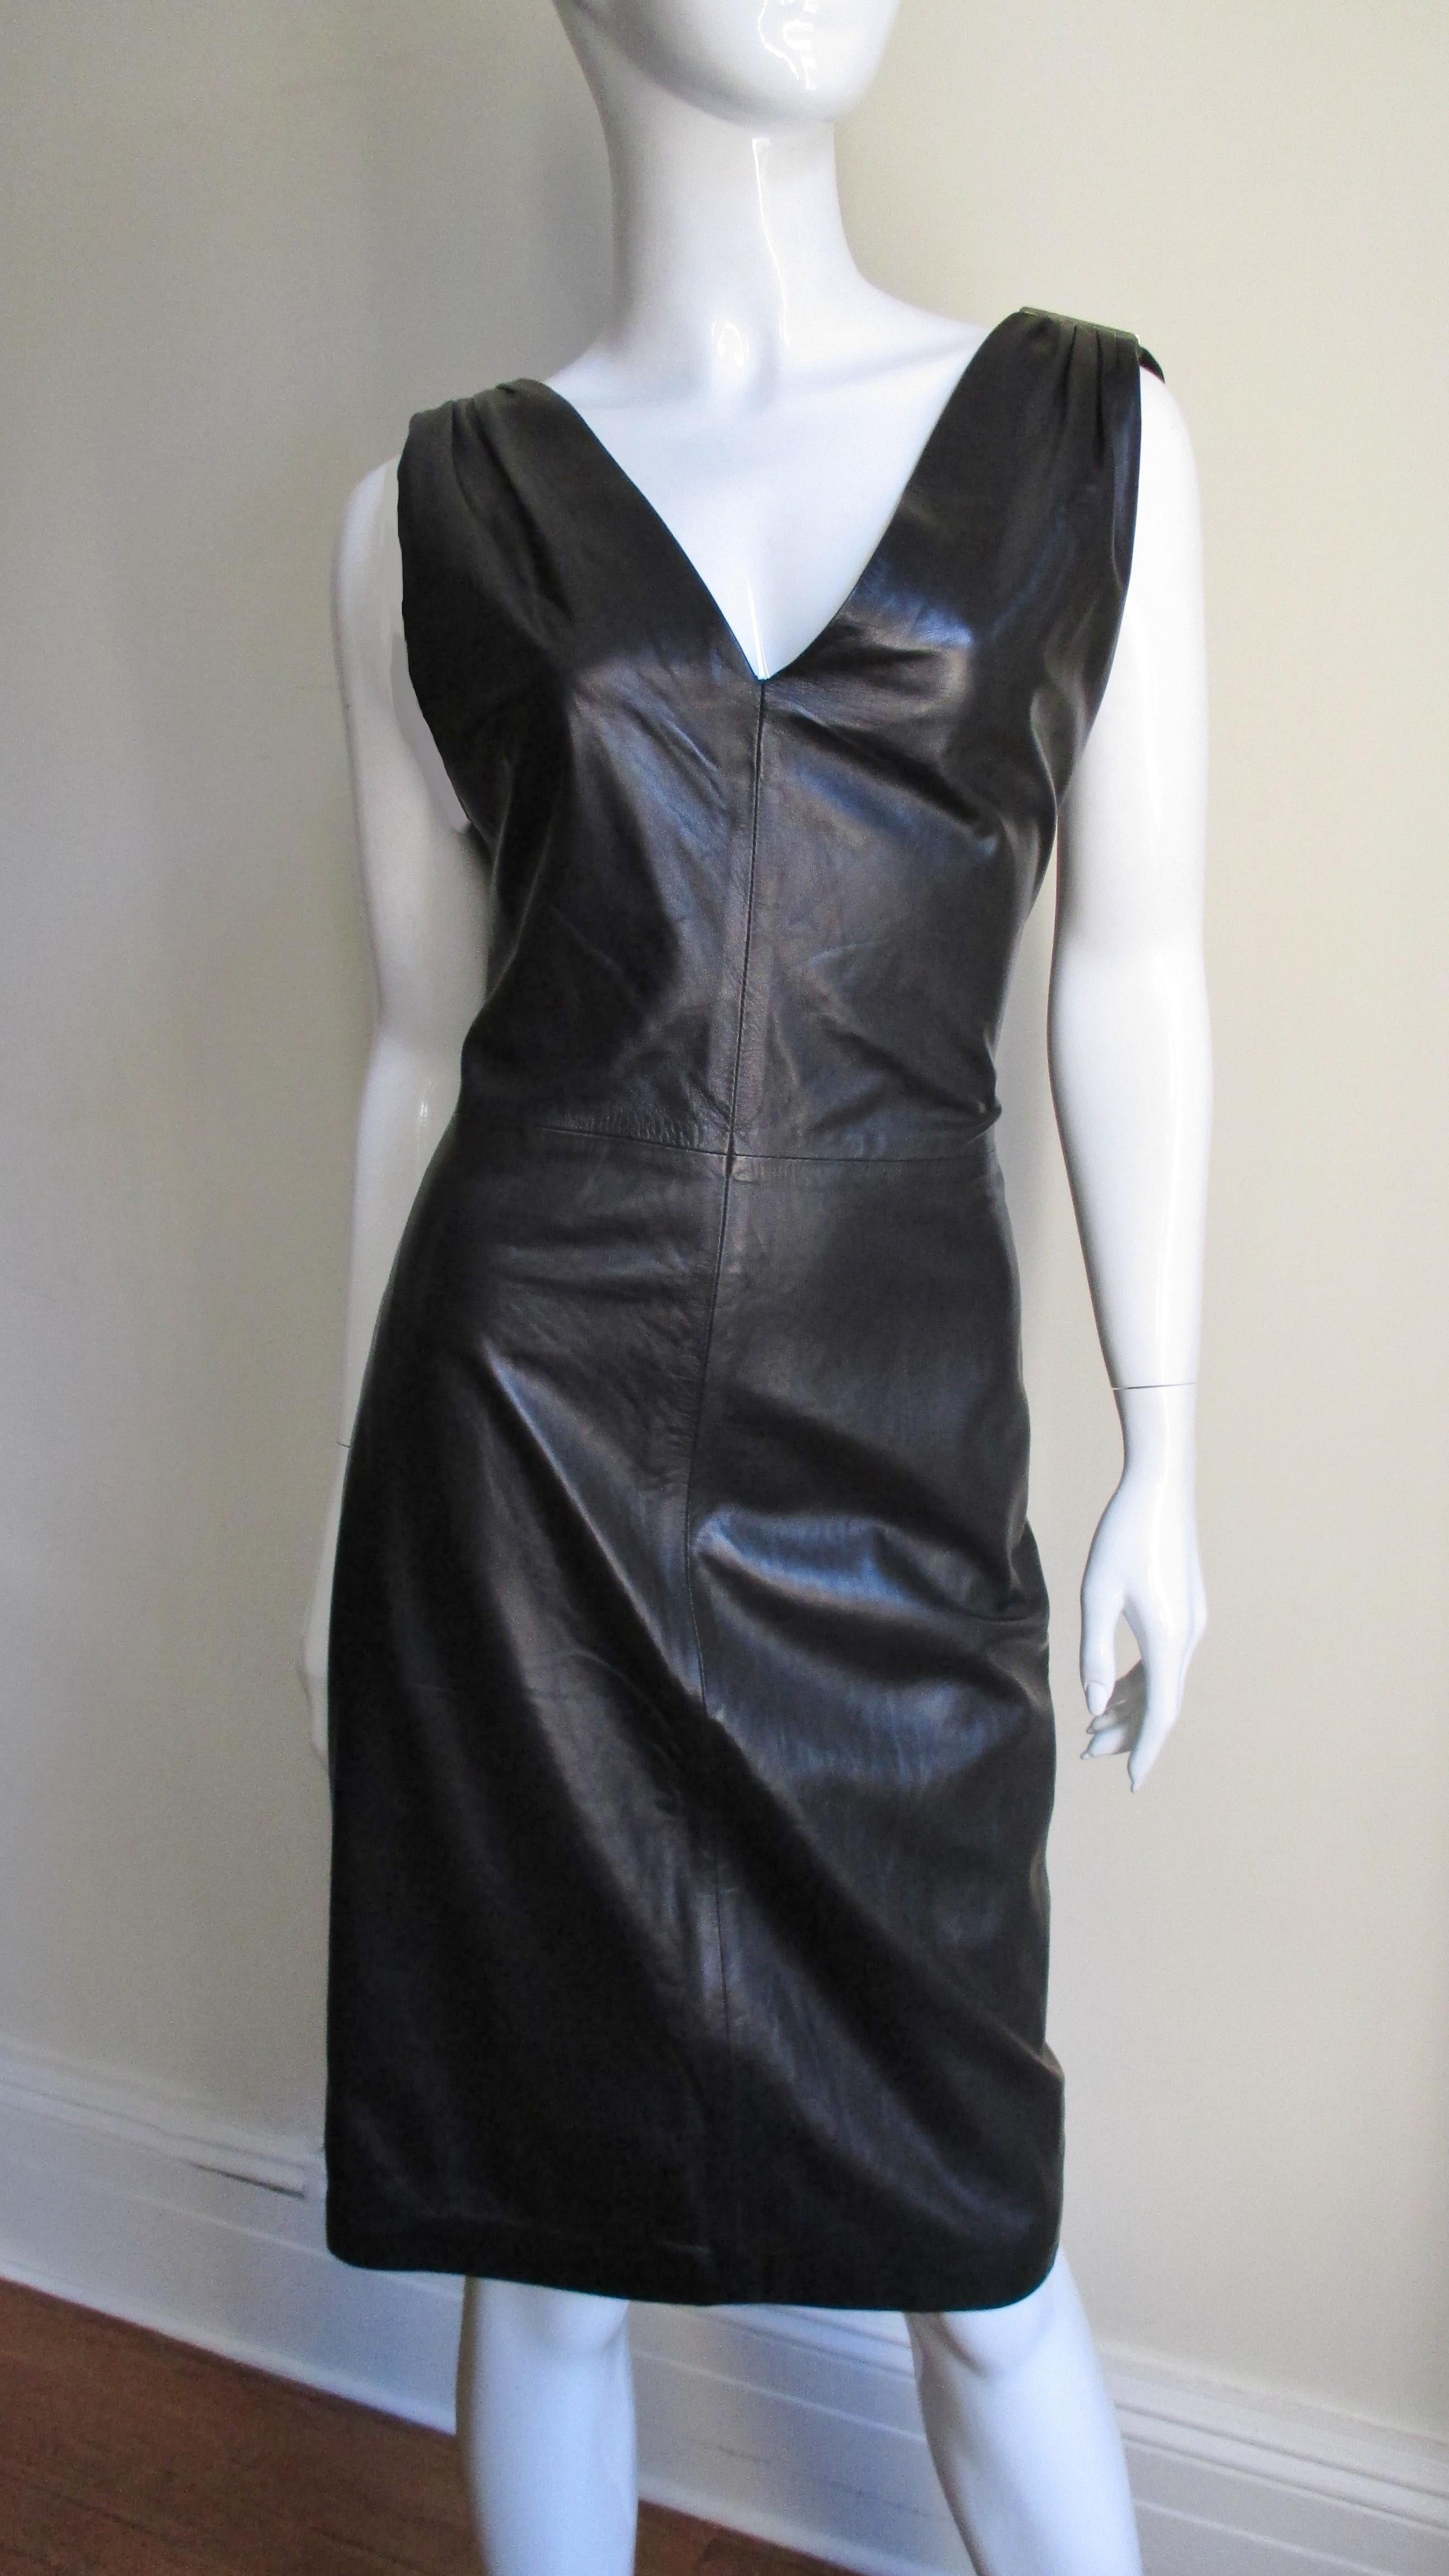 A fabulous black leather dress from Gianni Versace. It is sleeveless with a V neckline front and plunging V to the waist in the back. The shoulders are gathered onto a fine gold metal bar with the trademark Versace Greek Keys insignia along their